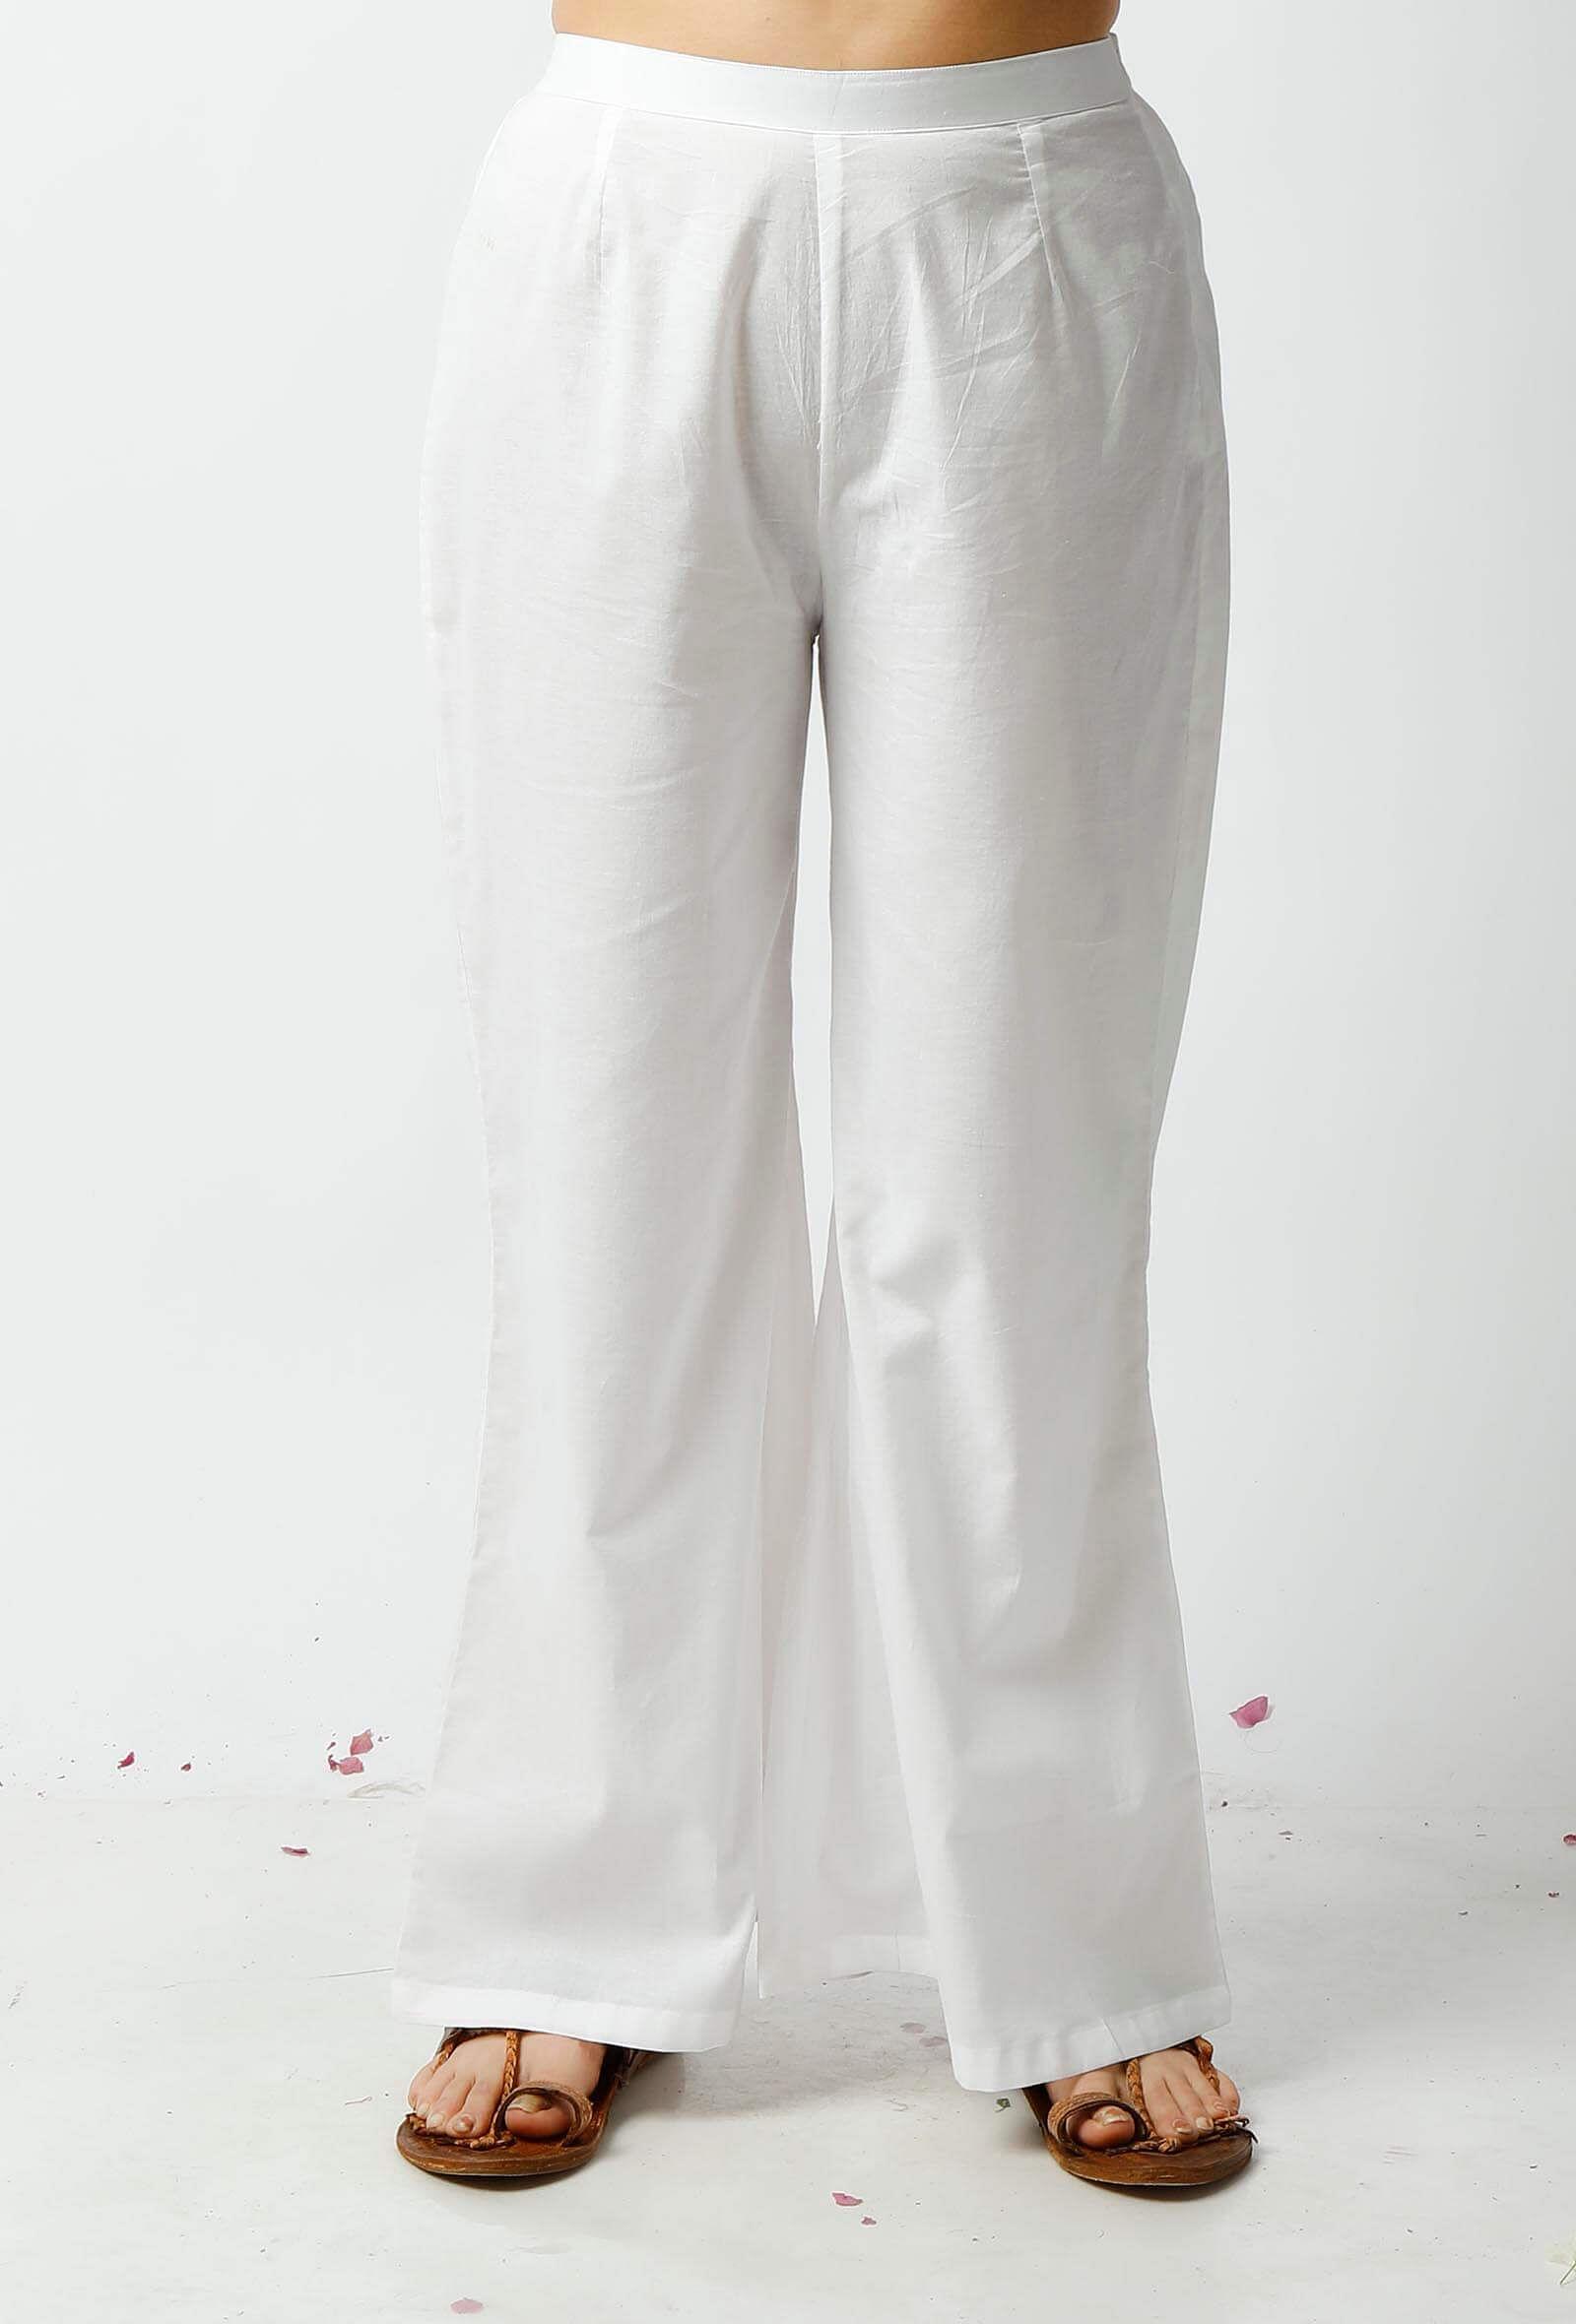 the-tainless-summer-white-pant